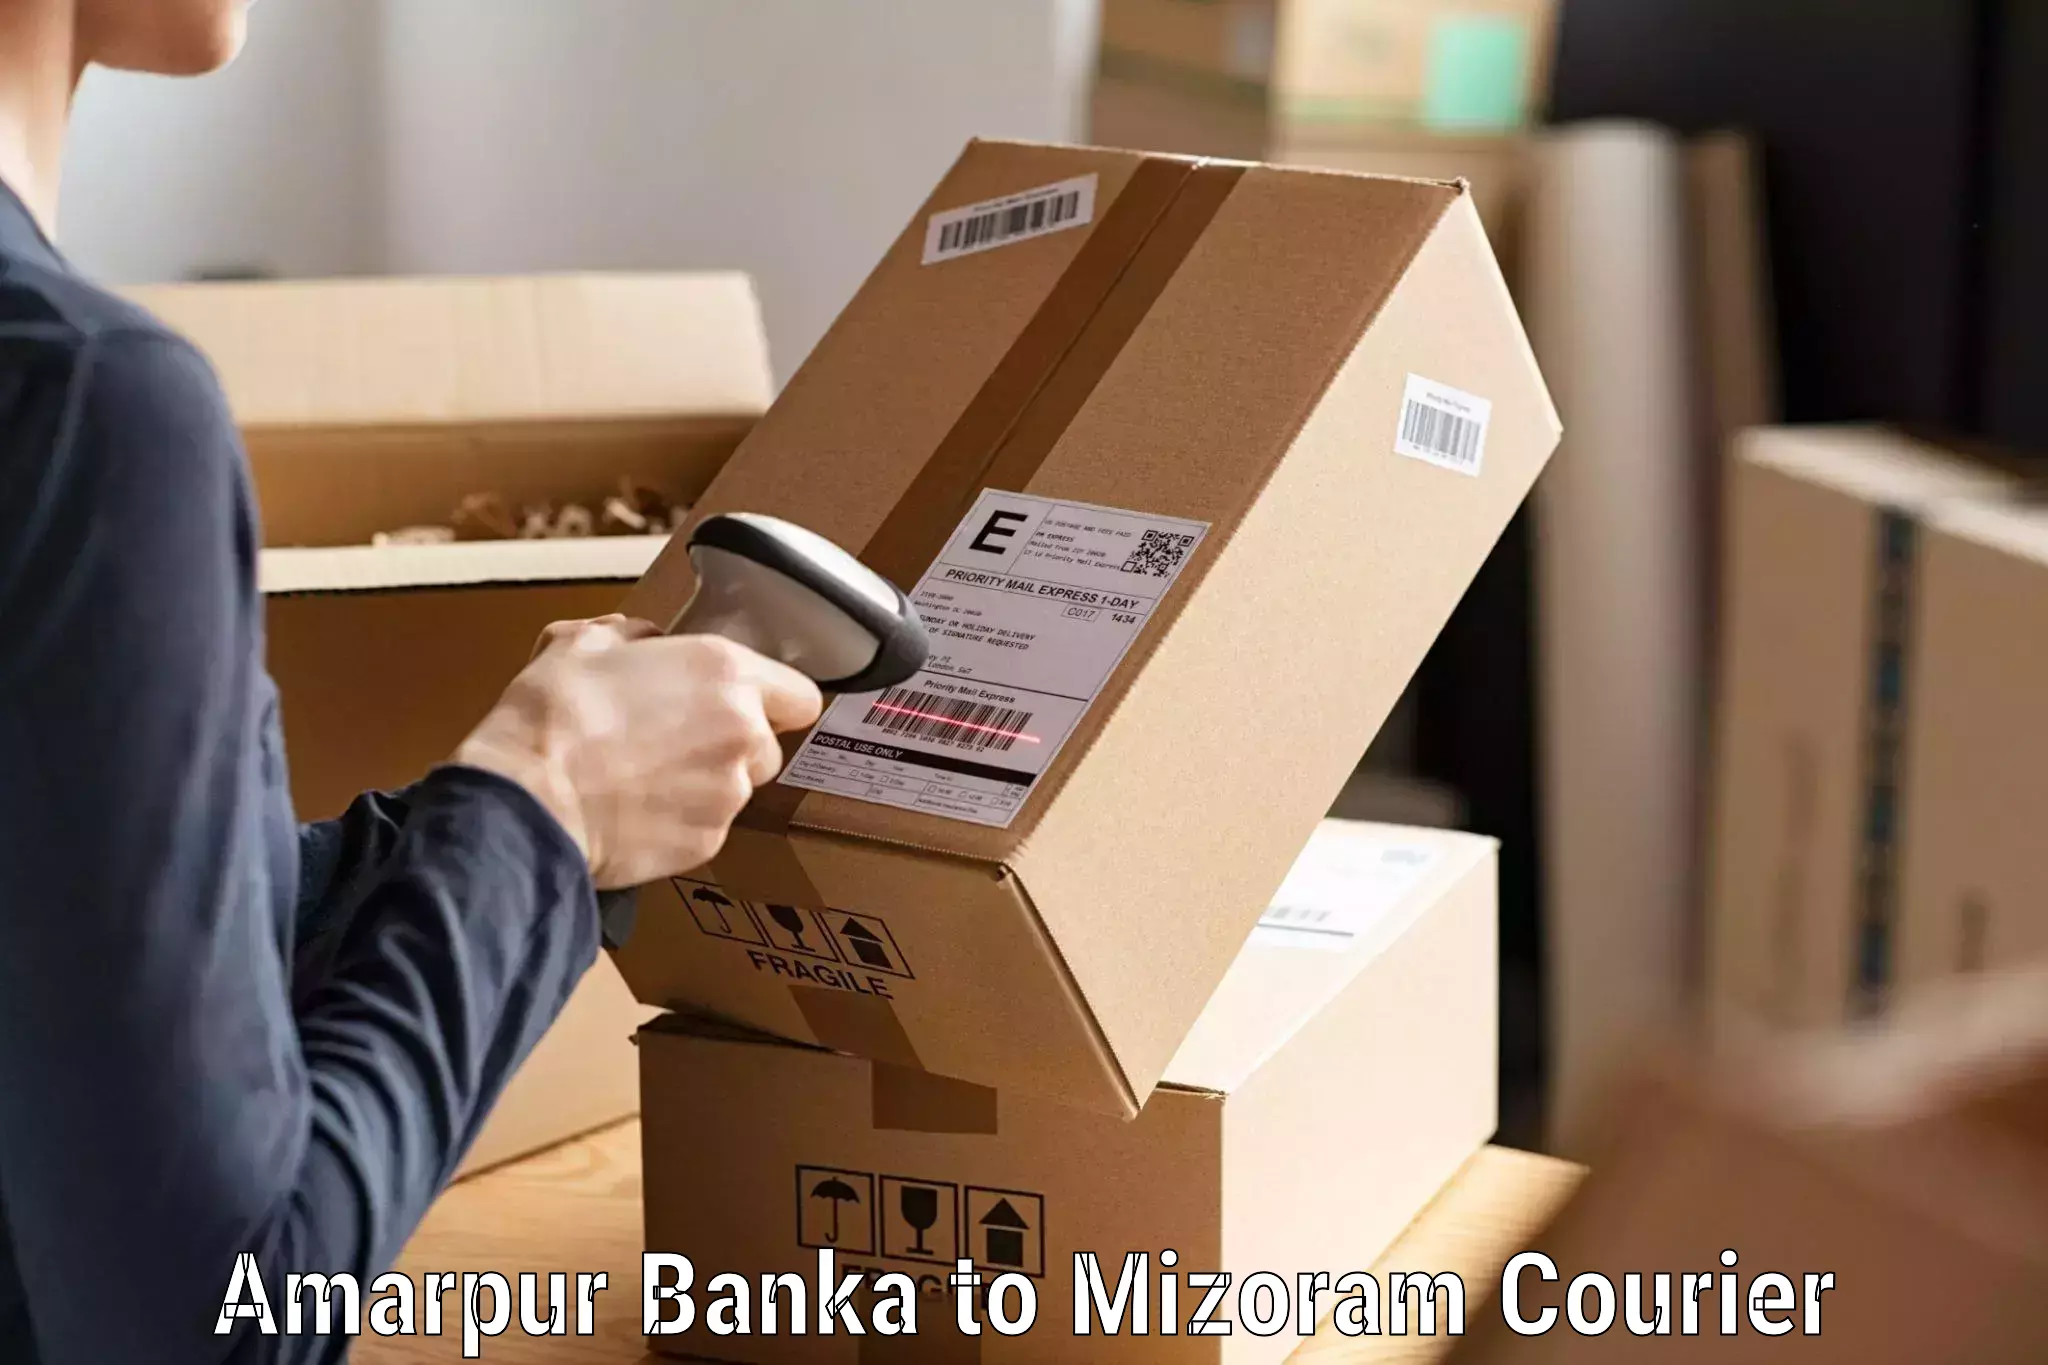 State-of-the-art courier technology Amarpur Banka to Mizoram